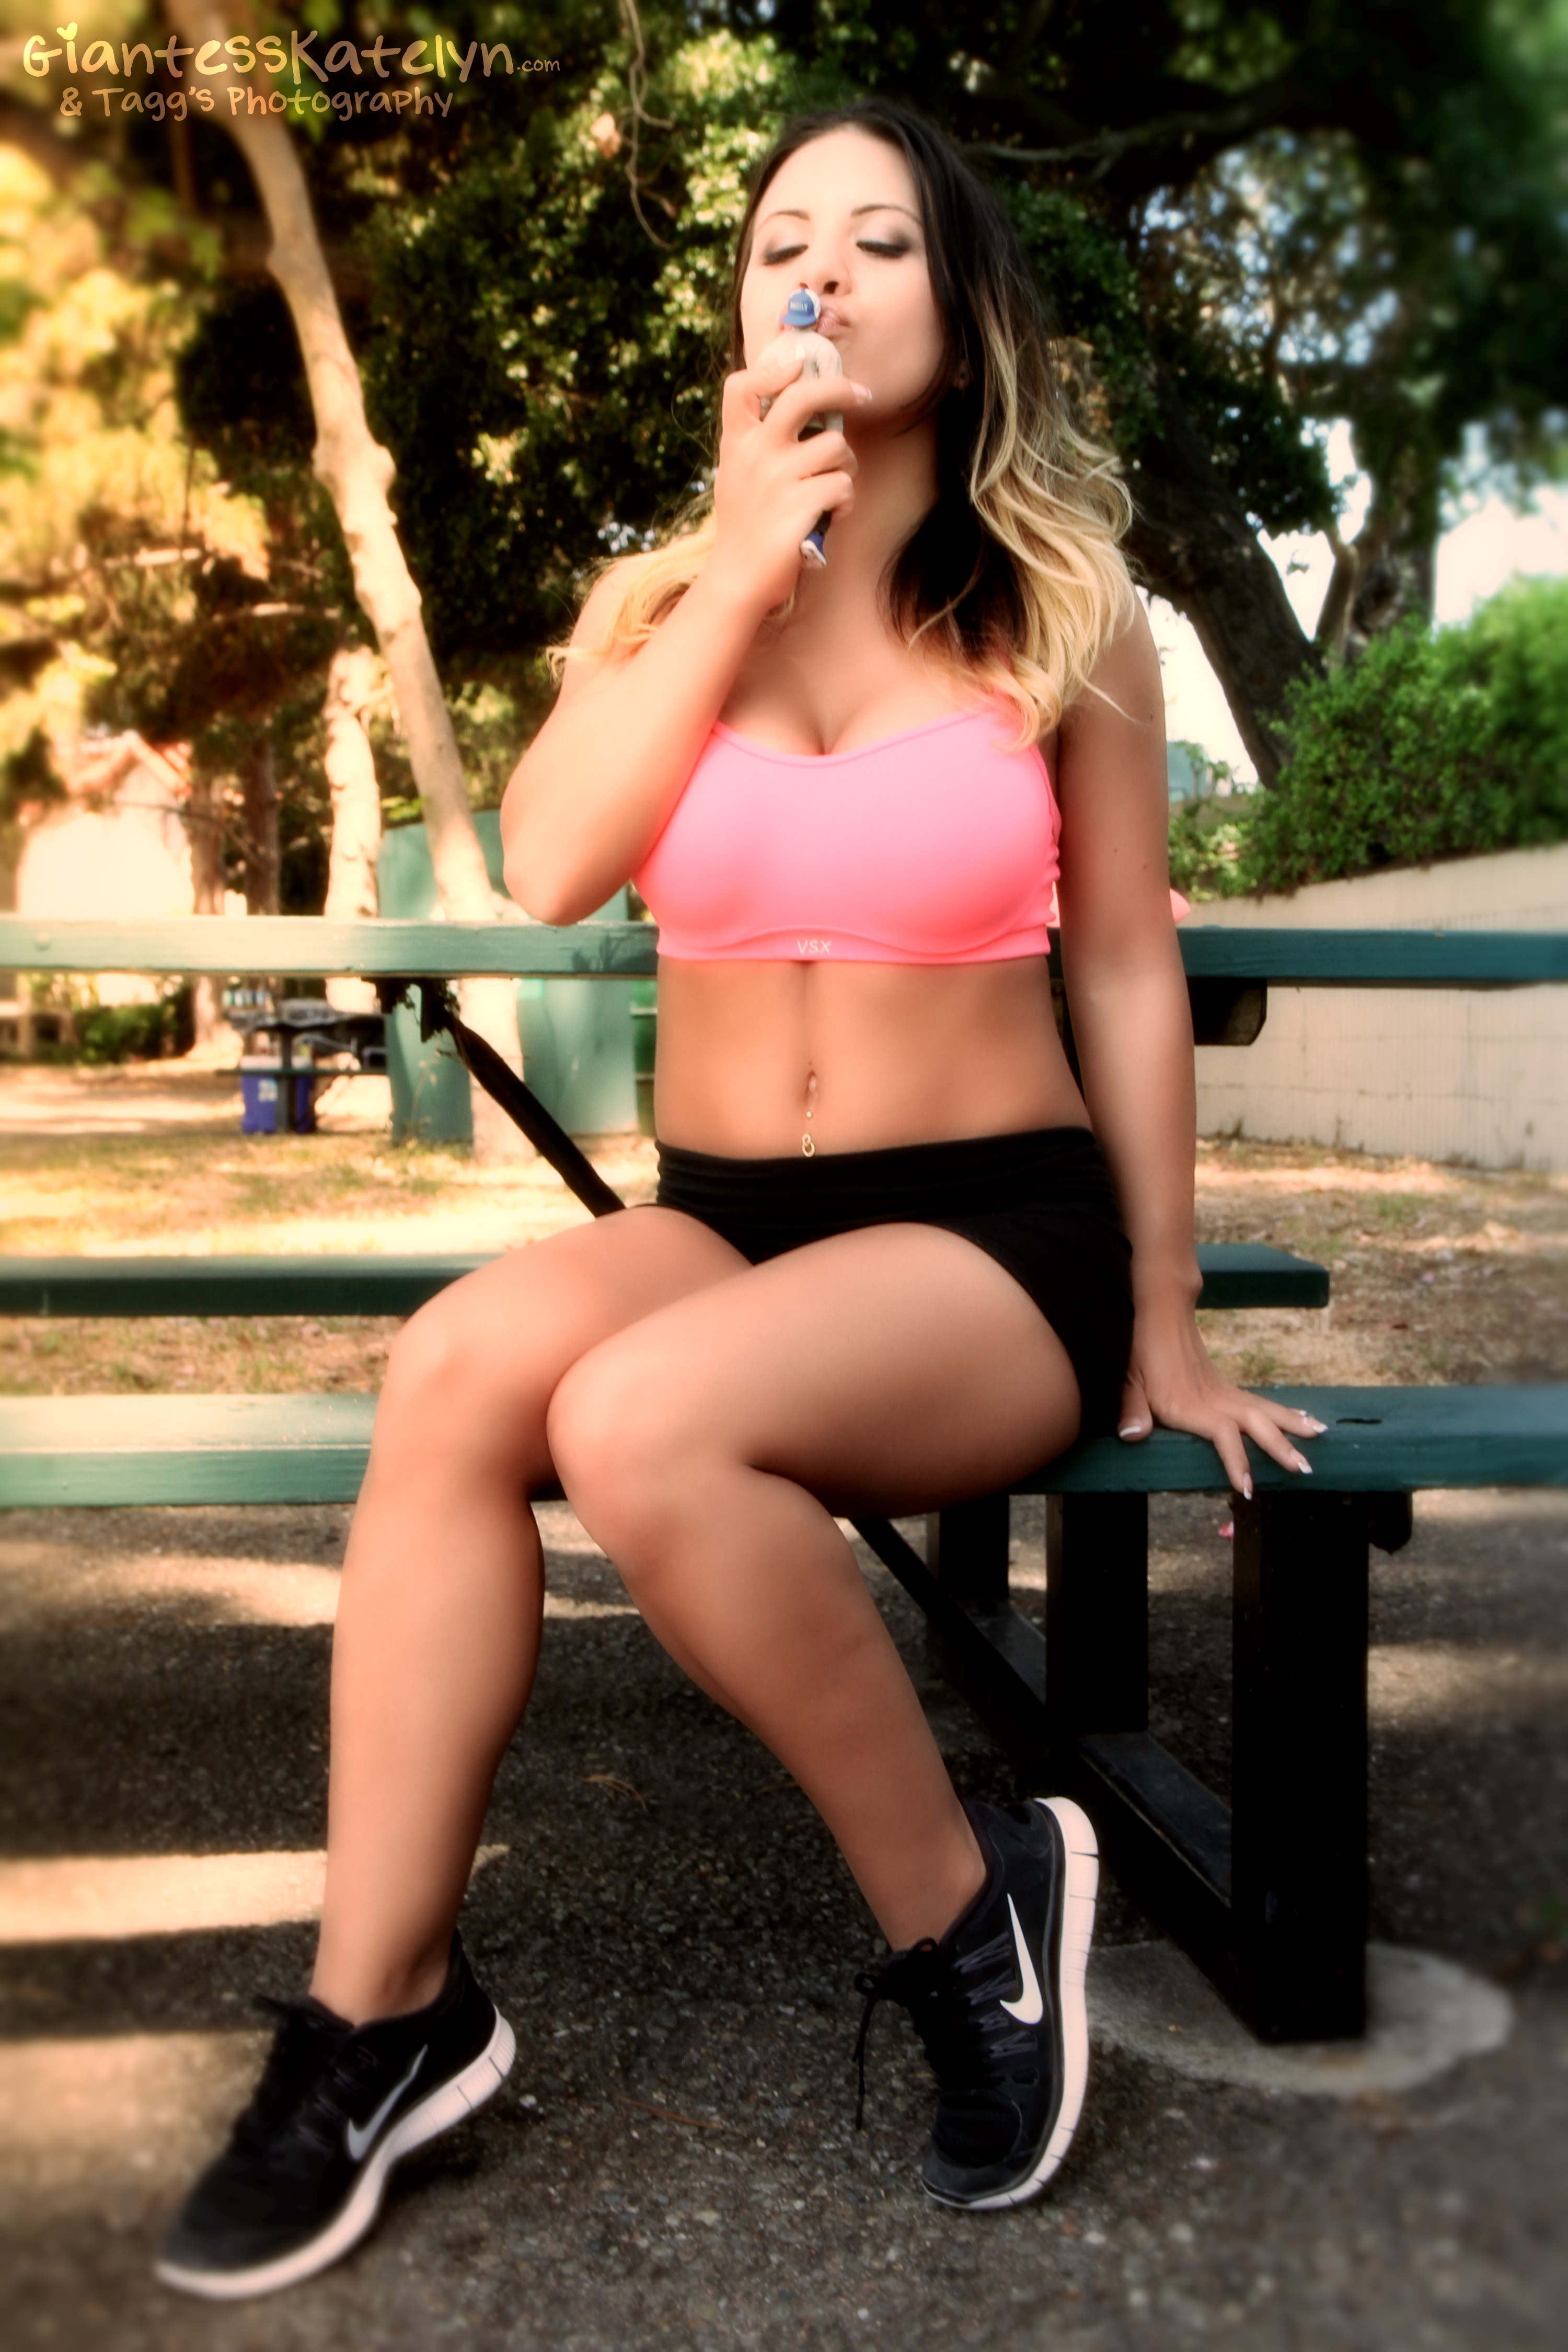 At_The_Park_with_Giantess_Katelyn-43